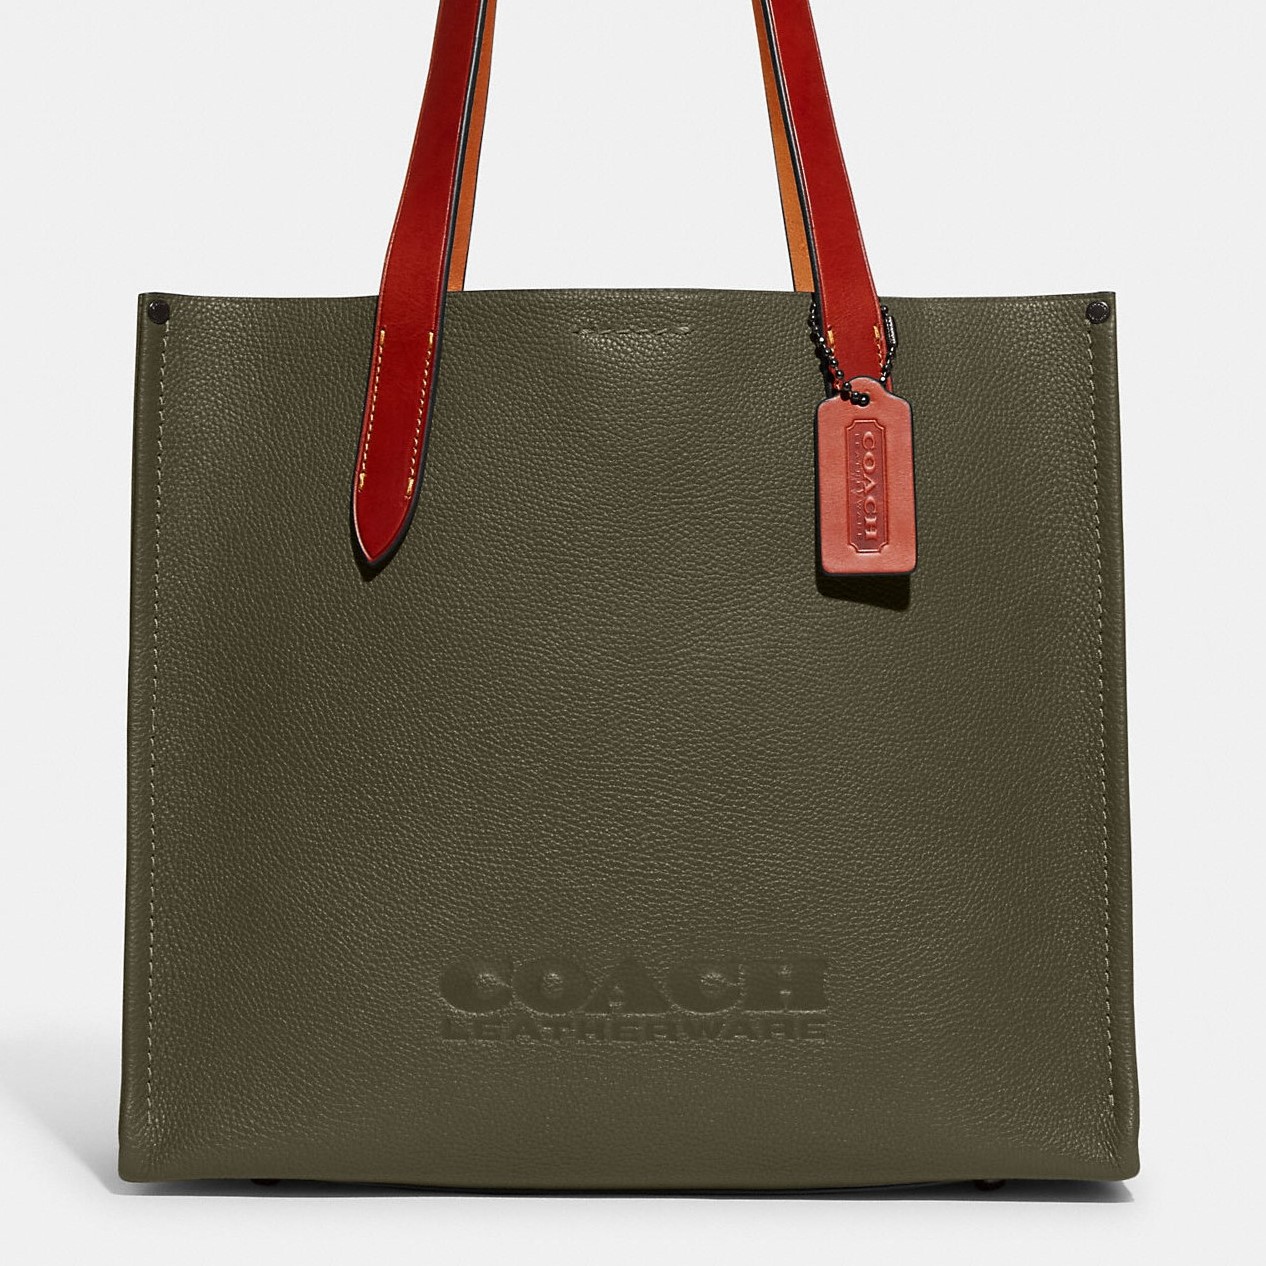 TÚI NỮ TOTE COACH RELAY TOTE 34 POLISHED PEBBLE LEATHER BAG CH757 12